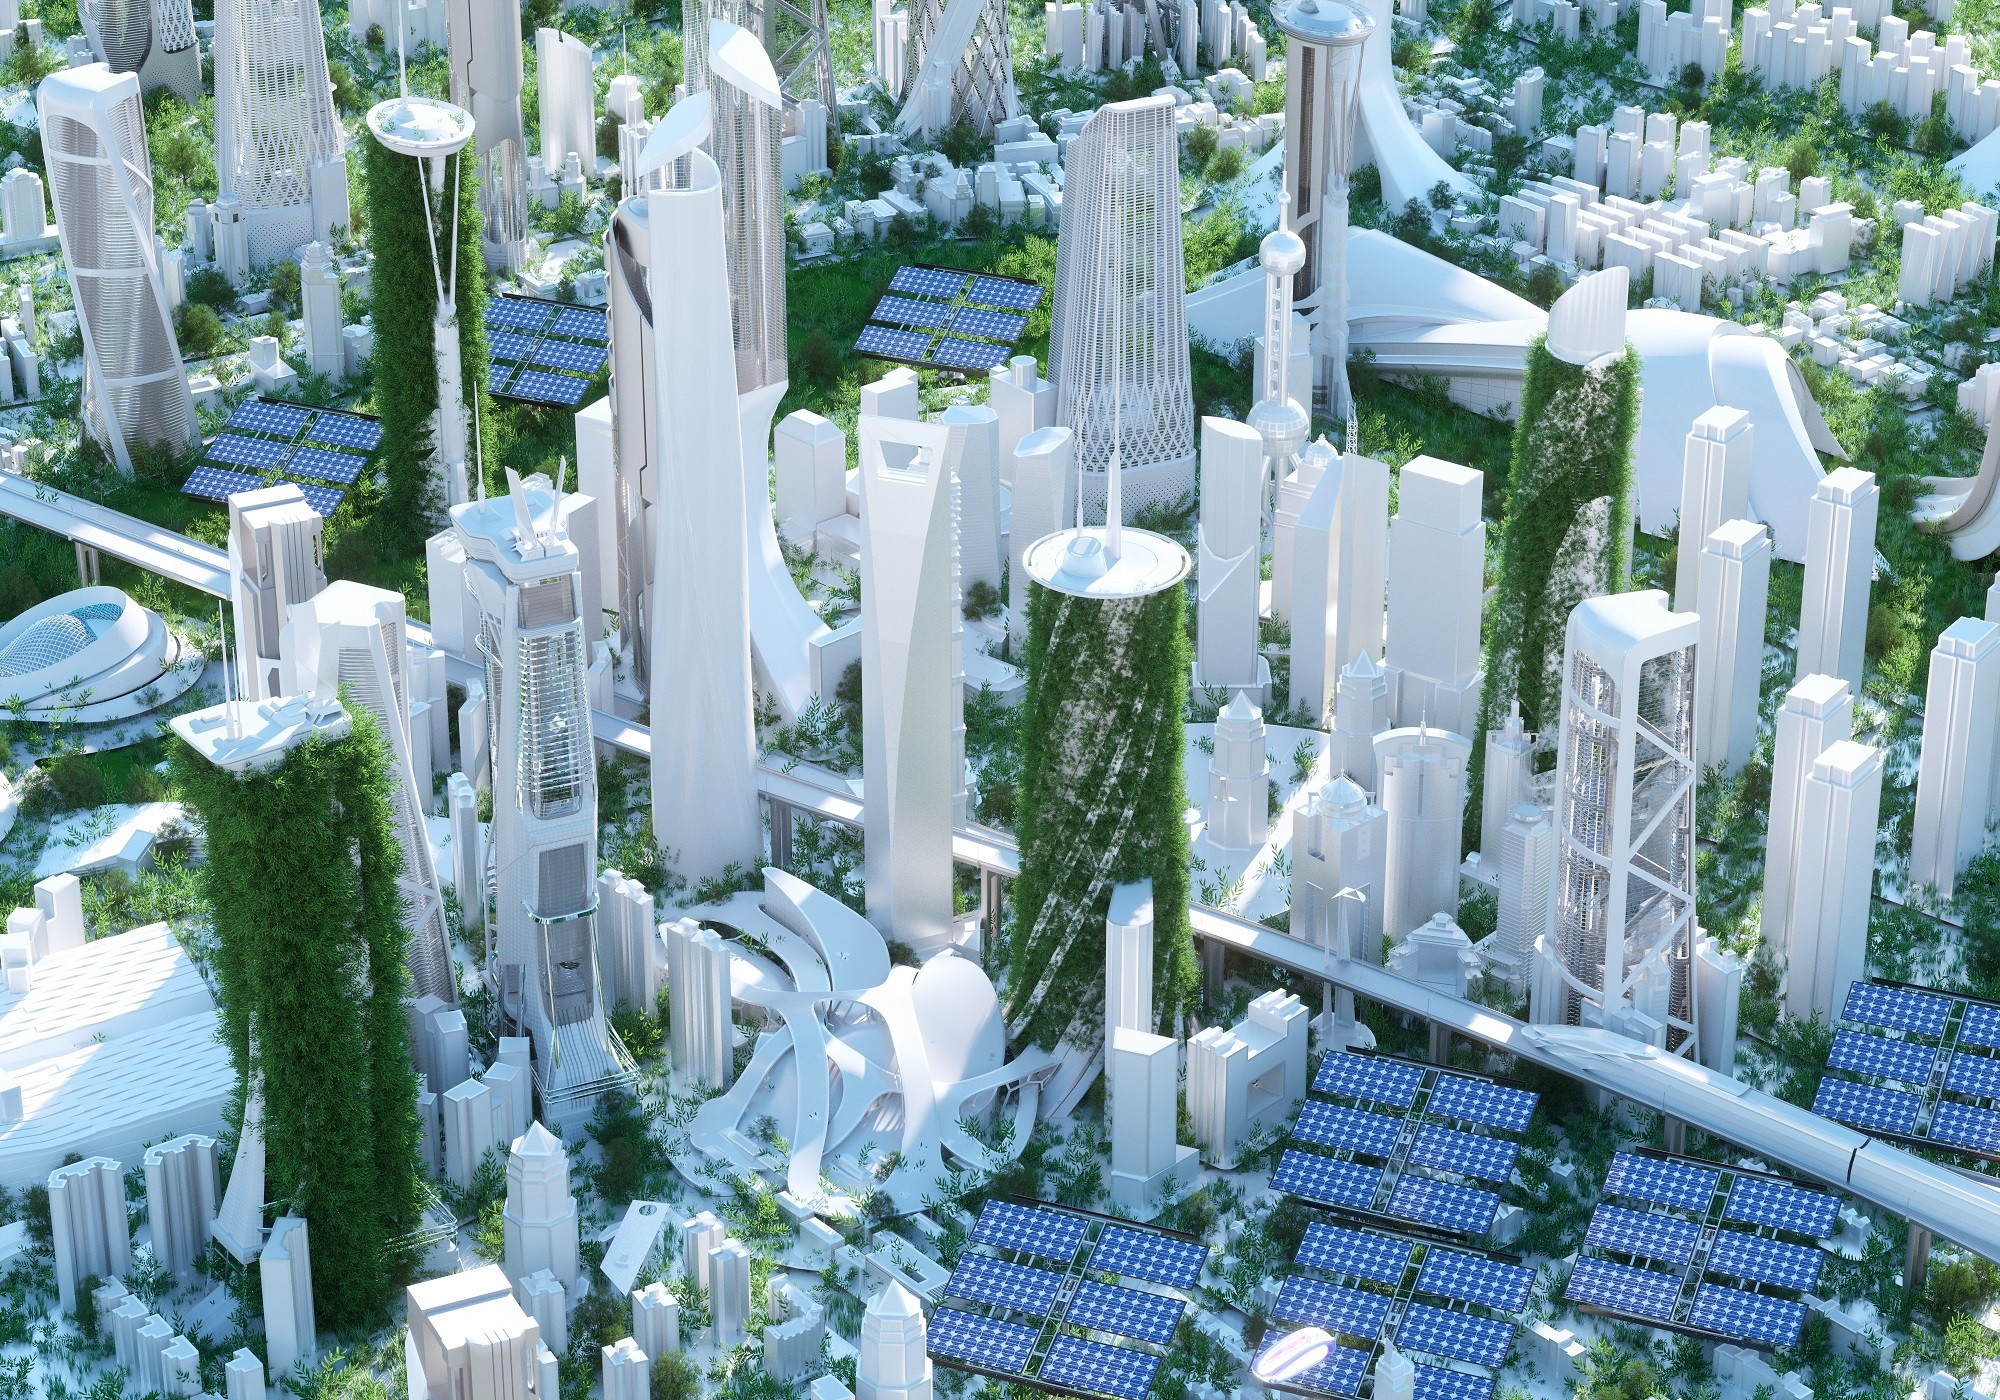 Earthbased.soul on X: One more view from our Solarpunk City. What should I  add? #solarpunk #worldbuilding  / X